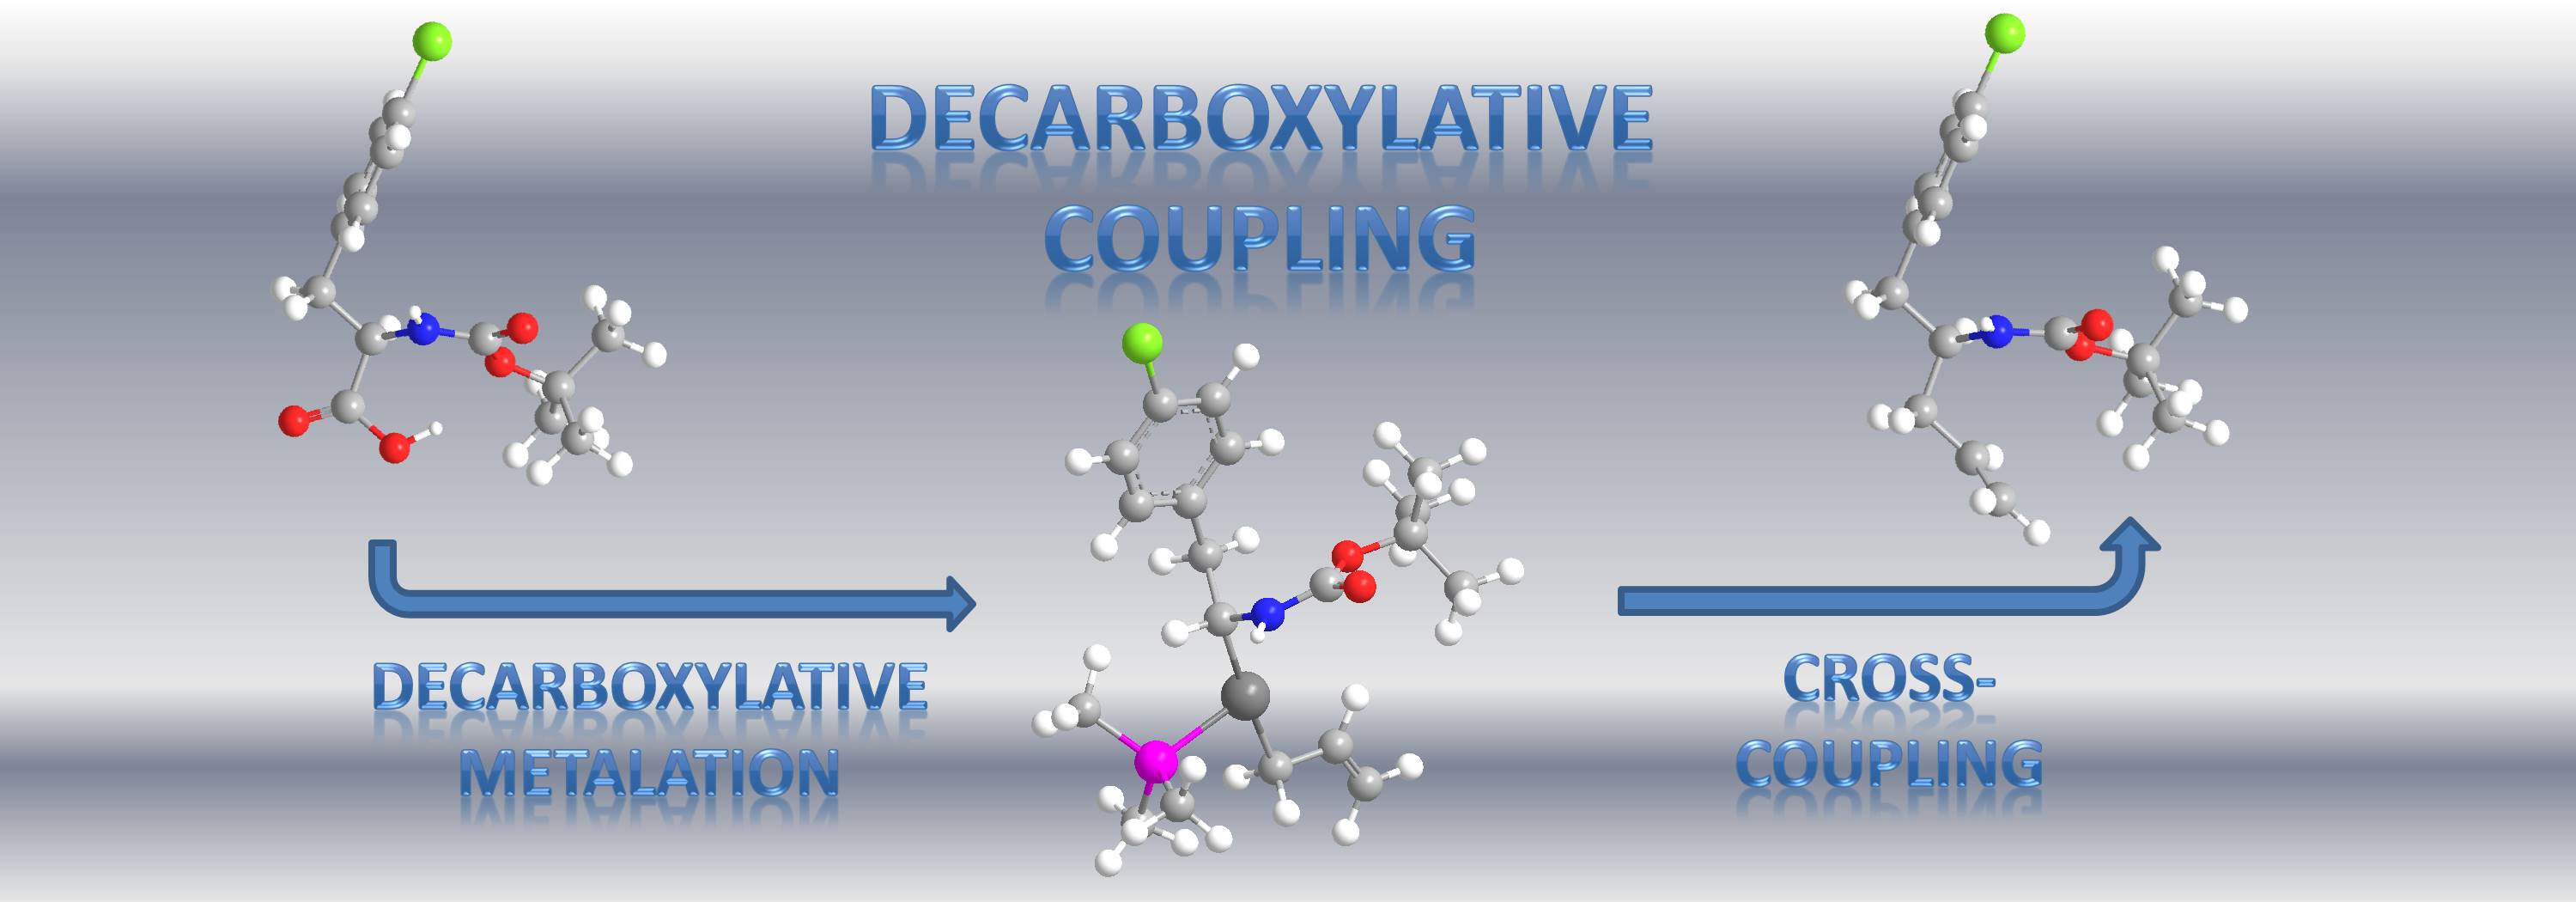 Decarboxylative coupling strategy